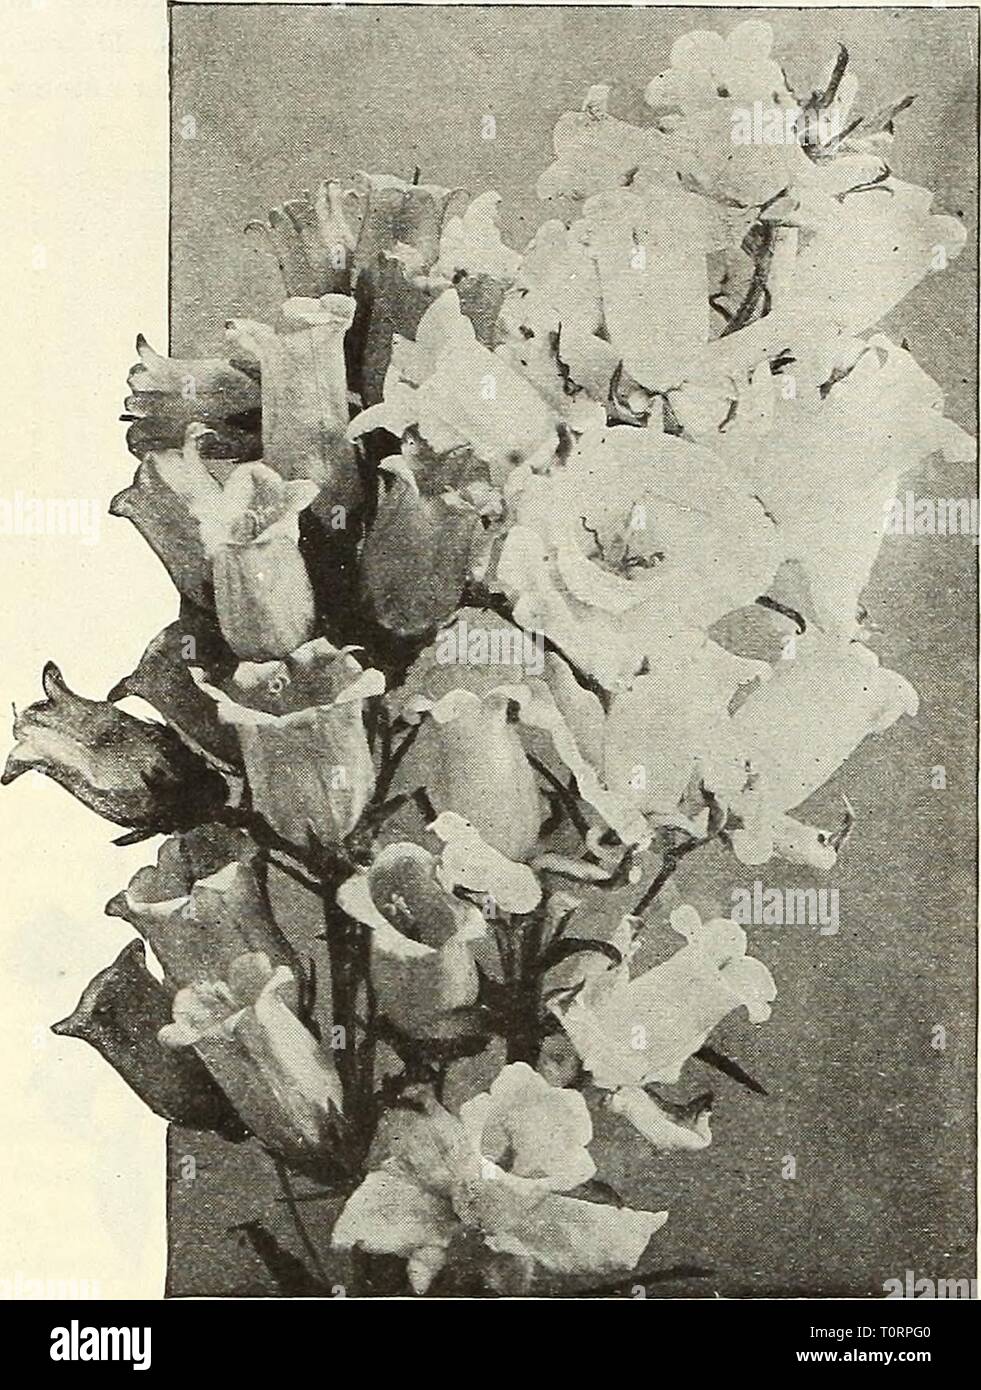 Dreer's autumn catalogue 1922 (1922) Dreer's autumn catalogue 1922  dreersautumncata1922henr Year: 1922  58 /flEHiyA-BREEl RELIABLE FLOWER SEEDS, I    Campanula Medium (Canterbury Bells) Per Pkt. Boltonia {False Chamomile) One of the showiest ot our native hardy perennials, grow- ing 4 to 6 feet high, with daisy-like flowers in countless thousands from July to September. Asteroides. White ; 10 Latisquanui. Lilac pink 10 Calceolaria Dreer's Perfection. A universal favorite for decorat- ing the greenhouse or conservatory. This strain is grown for us by .a celebrated specialist, flowers beau- tif Stock Photo